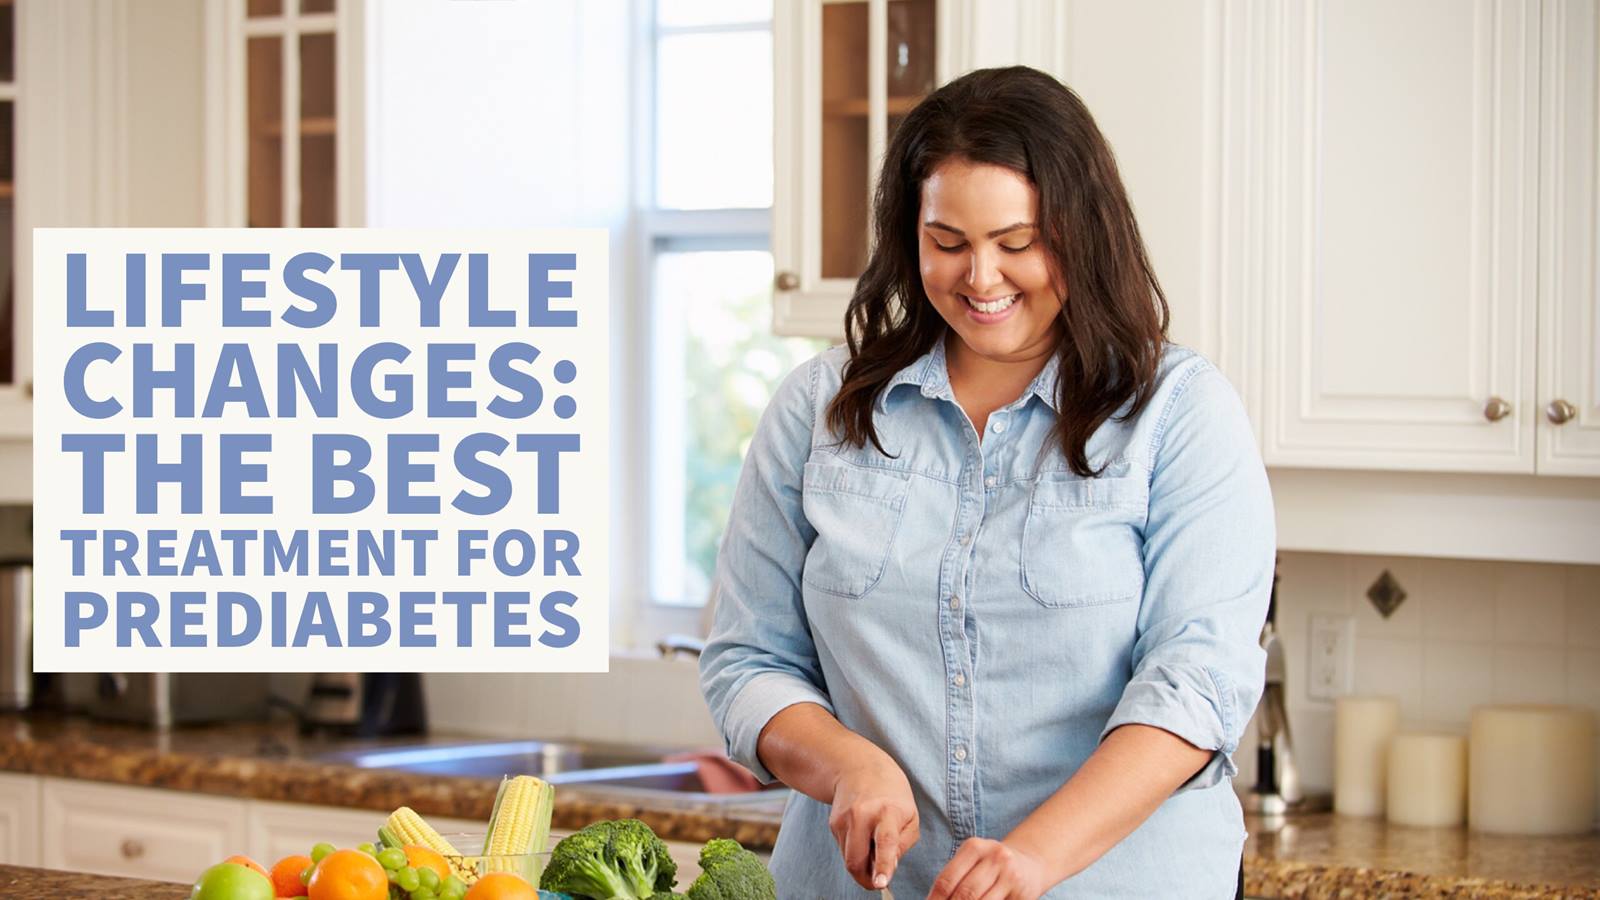 5 Lifestyle Changes You Can Make To Help Reverse Prediabetes